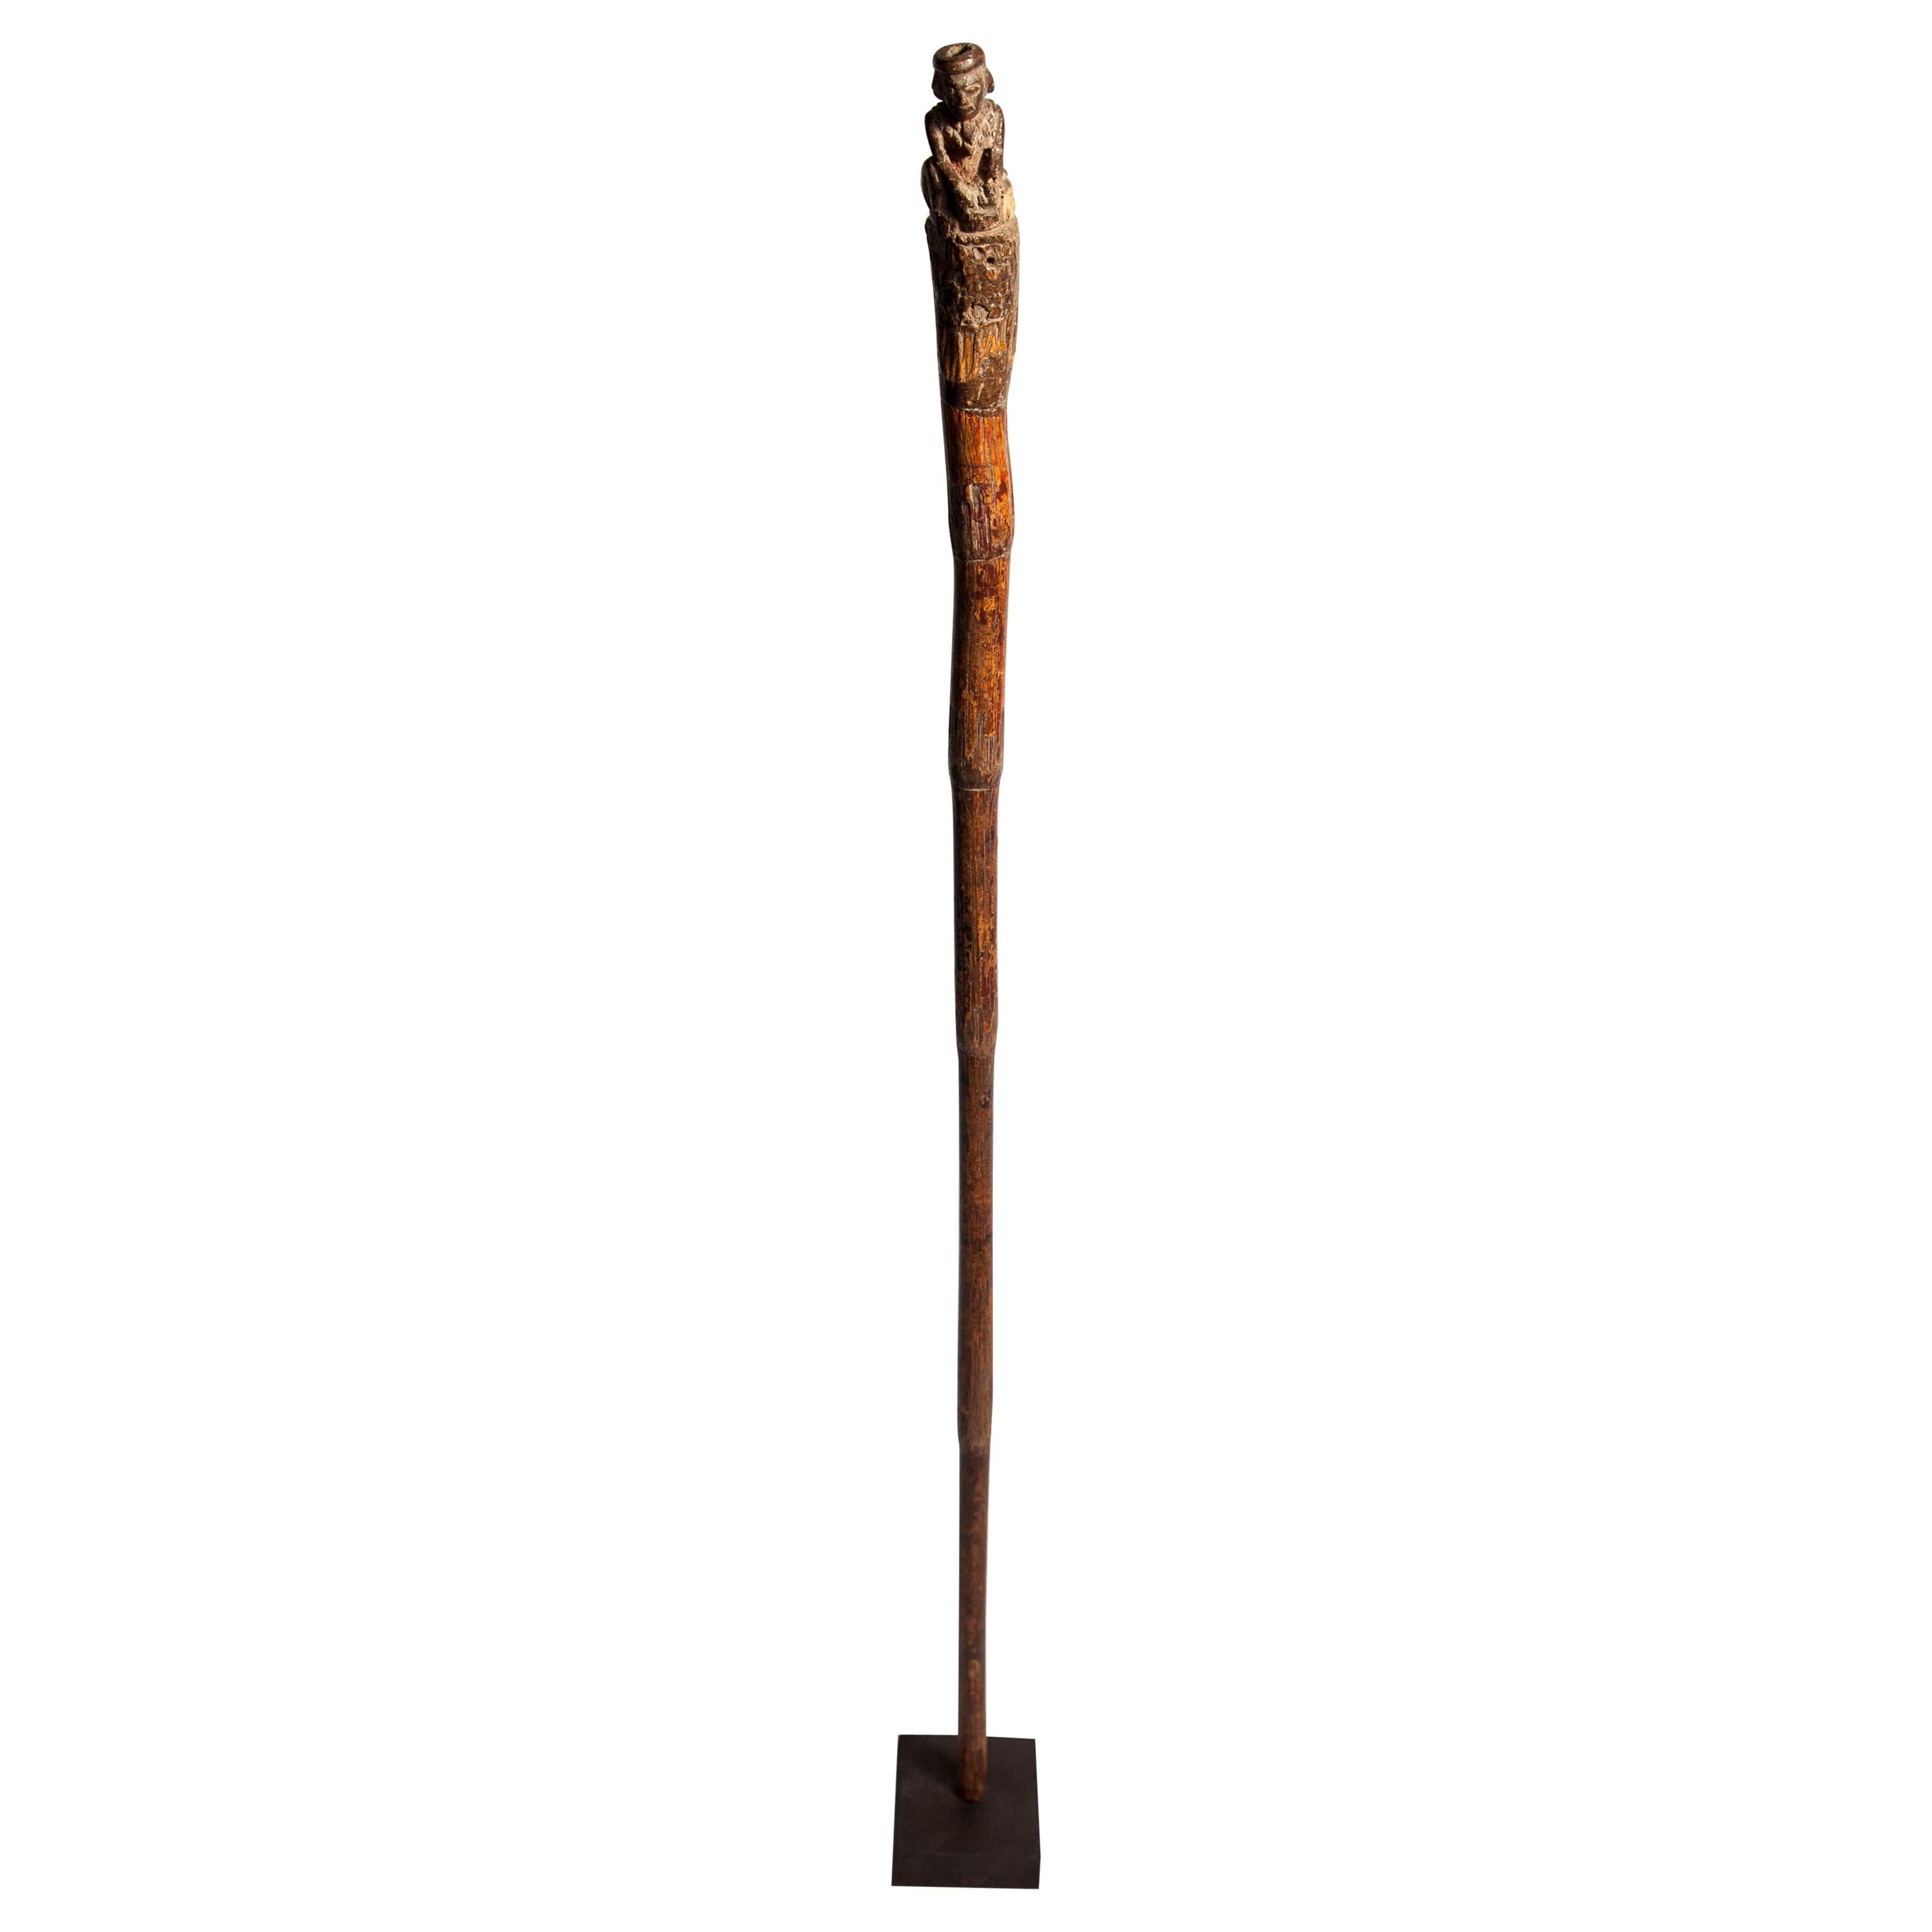 Vintage Walking Stick with Carved Figure, from Burma, Bamboo, Early 20th Century